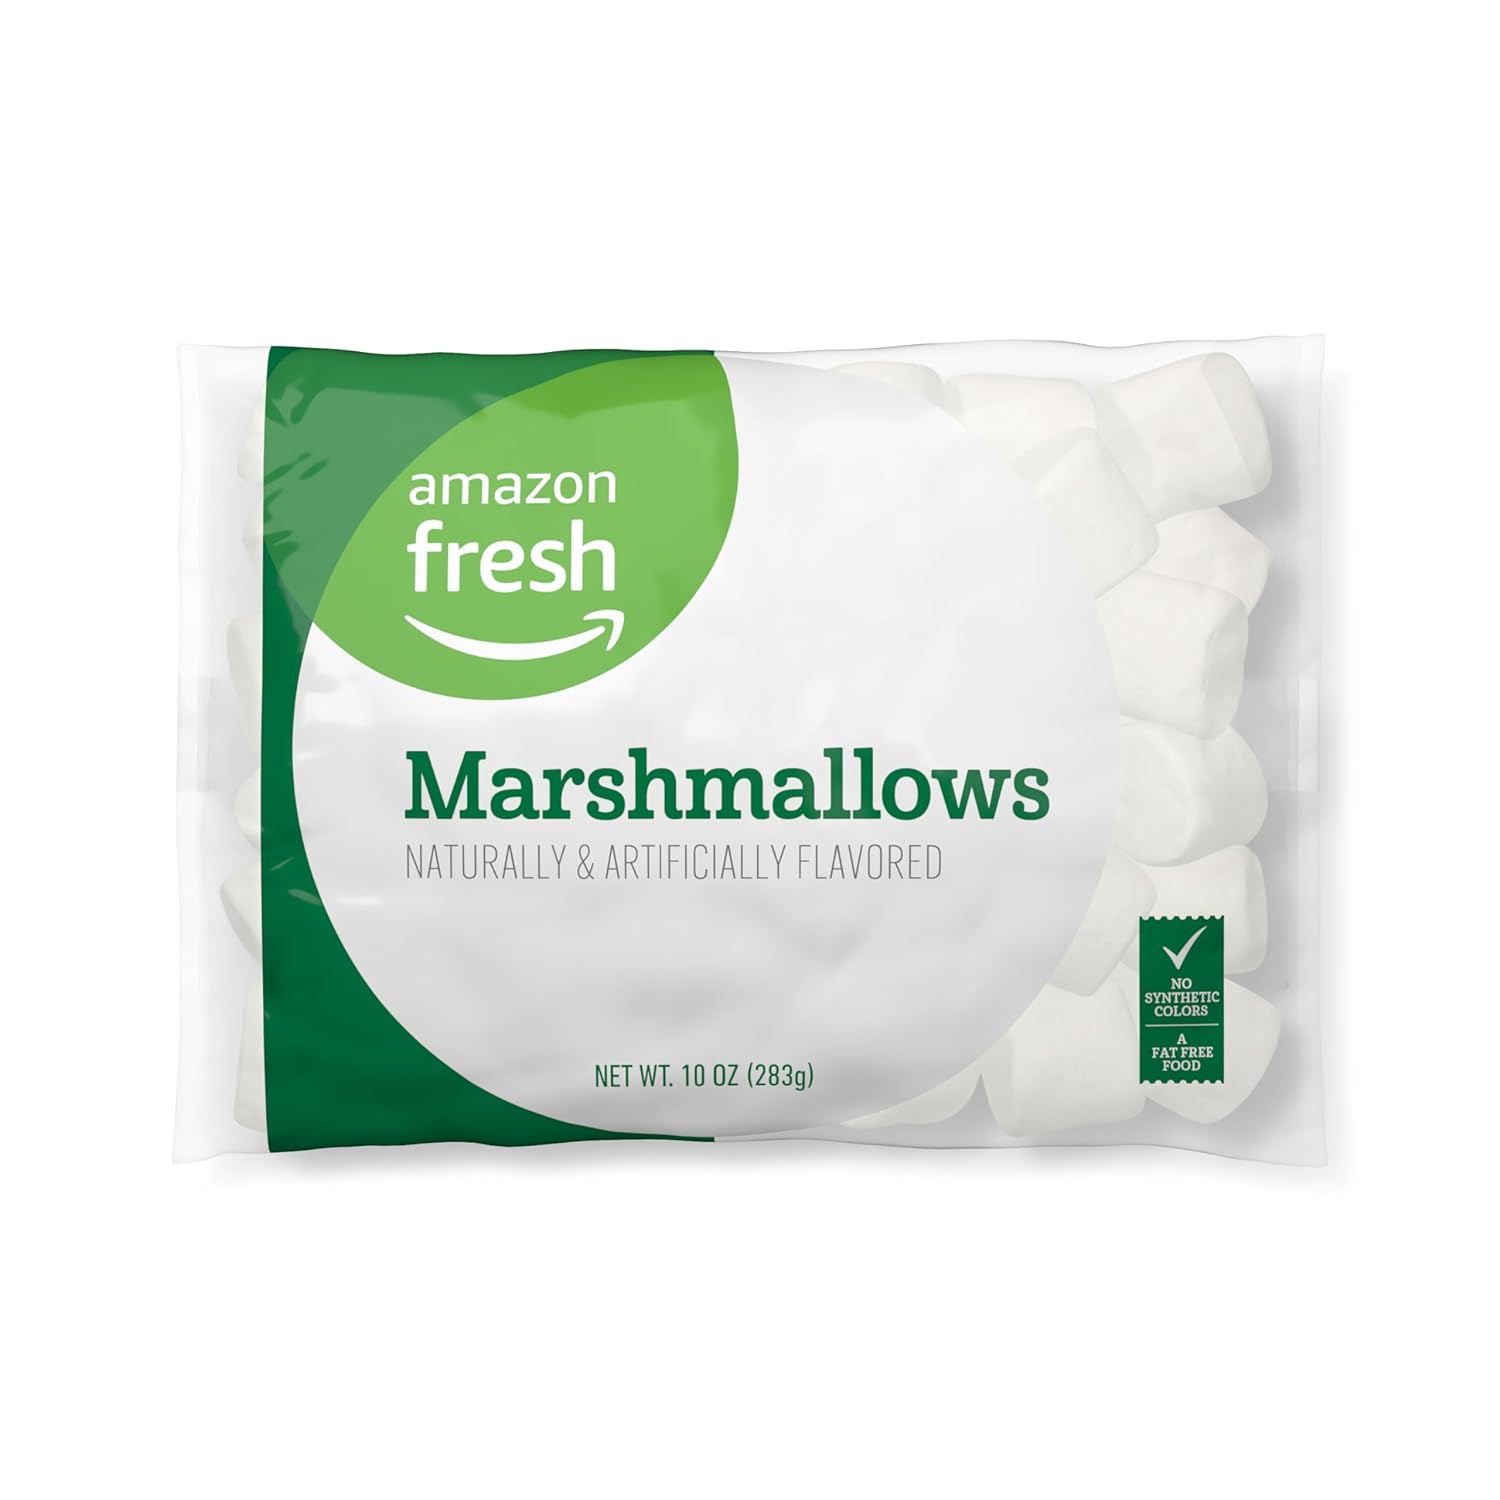 Pleasantly surprised how fresh and aromatic these fluffy marshmallows are. More of a name brand taste and not at all generic tasting. They did well with flavor and texture.Usually, I buy a pack from the store for use in riced cereal treats, but I saw these Amazon brand marshmallows for a reasonable price and decided to order them on a whim. Kinda forgot about the order until they arrived. Now I need to buy some cereal! Or maybe more marshmallows too because these have a really good flavor.I've b